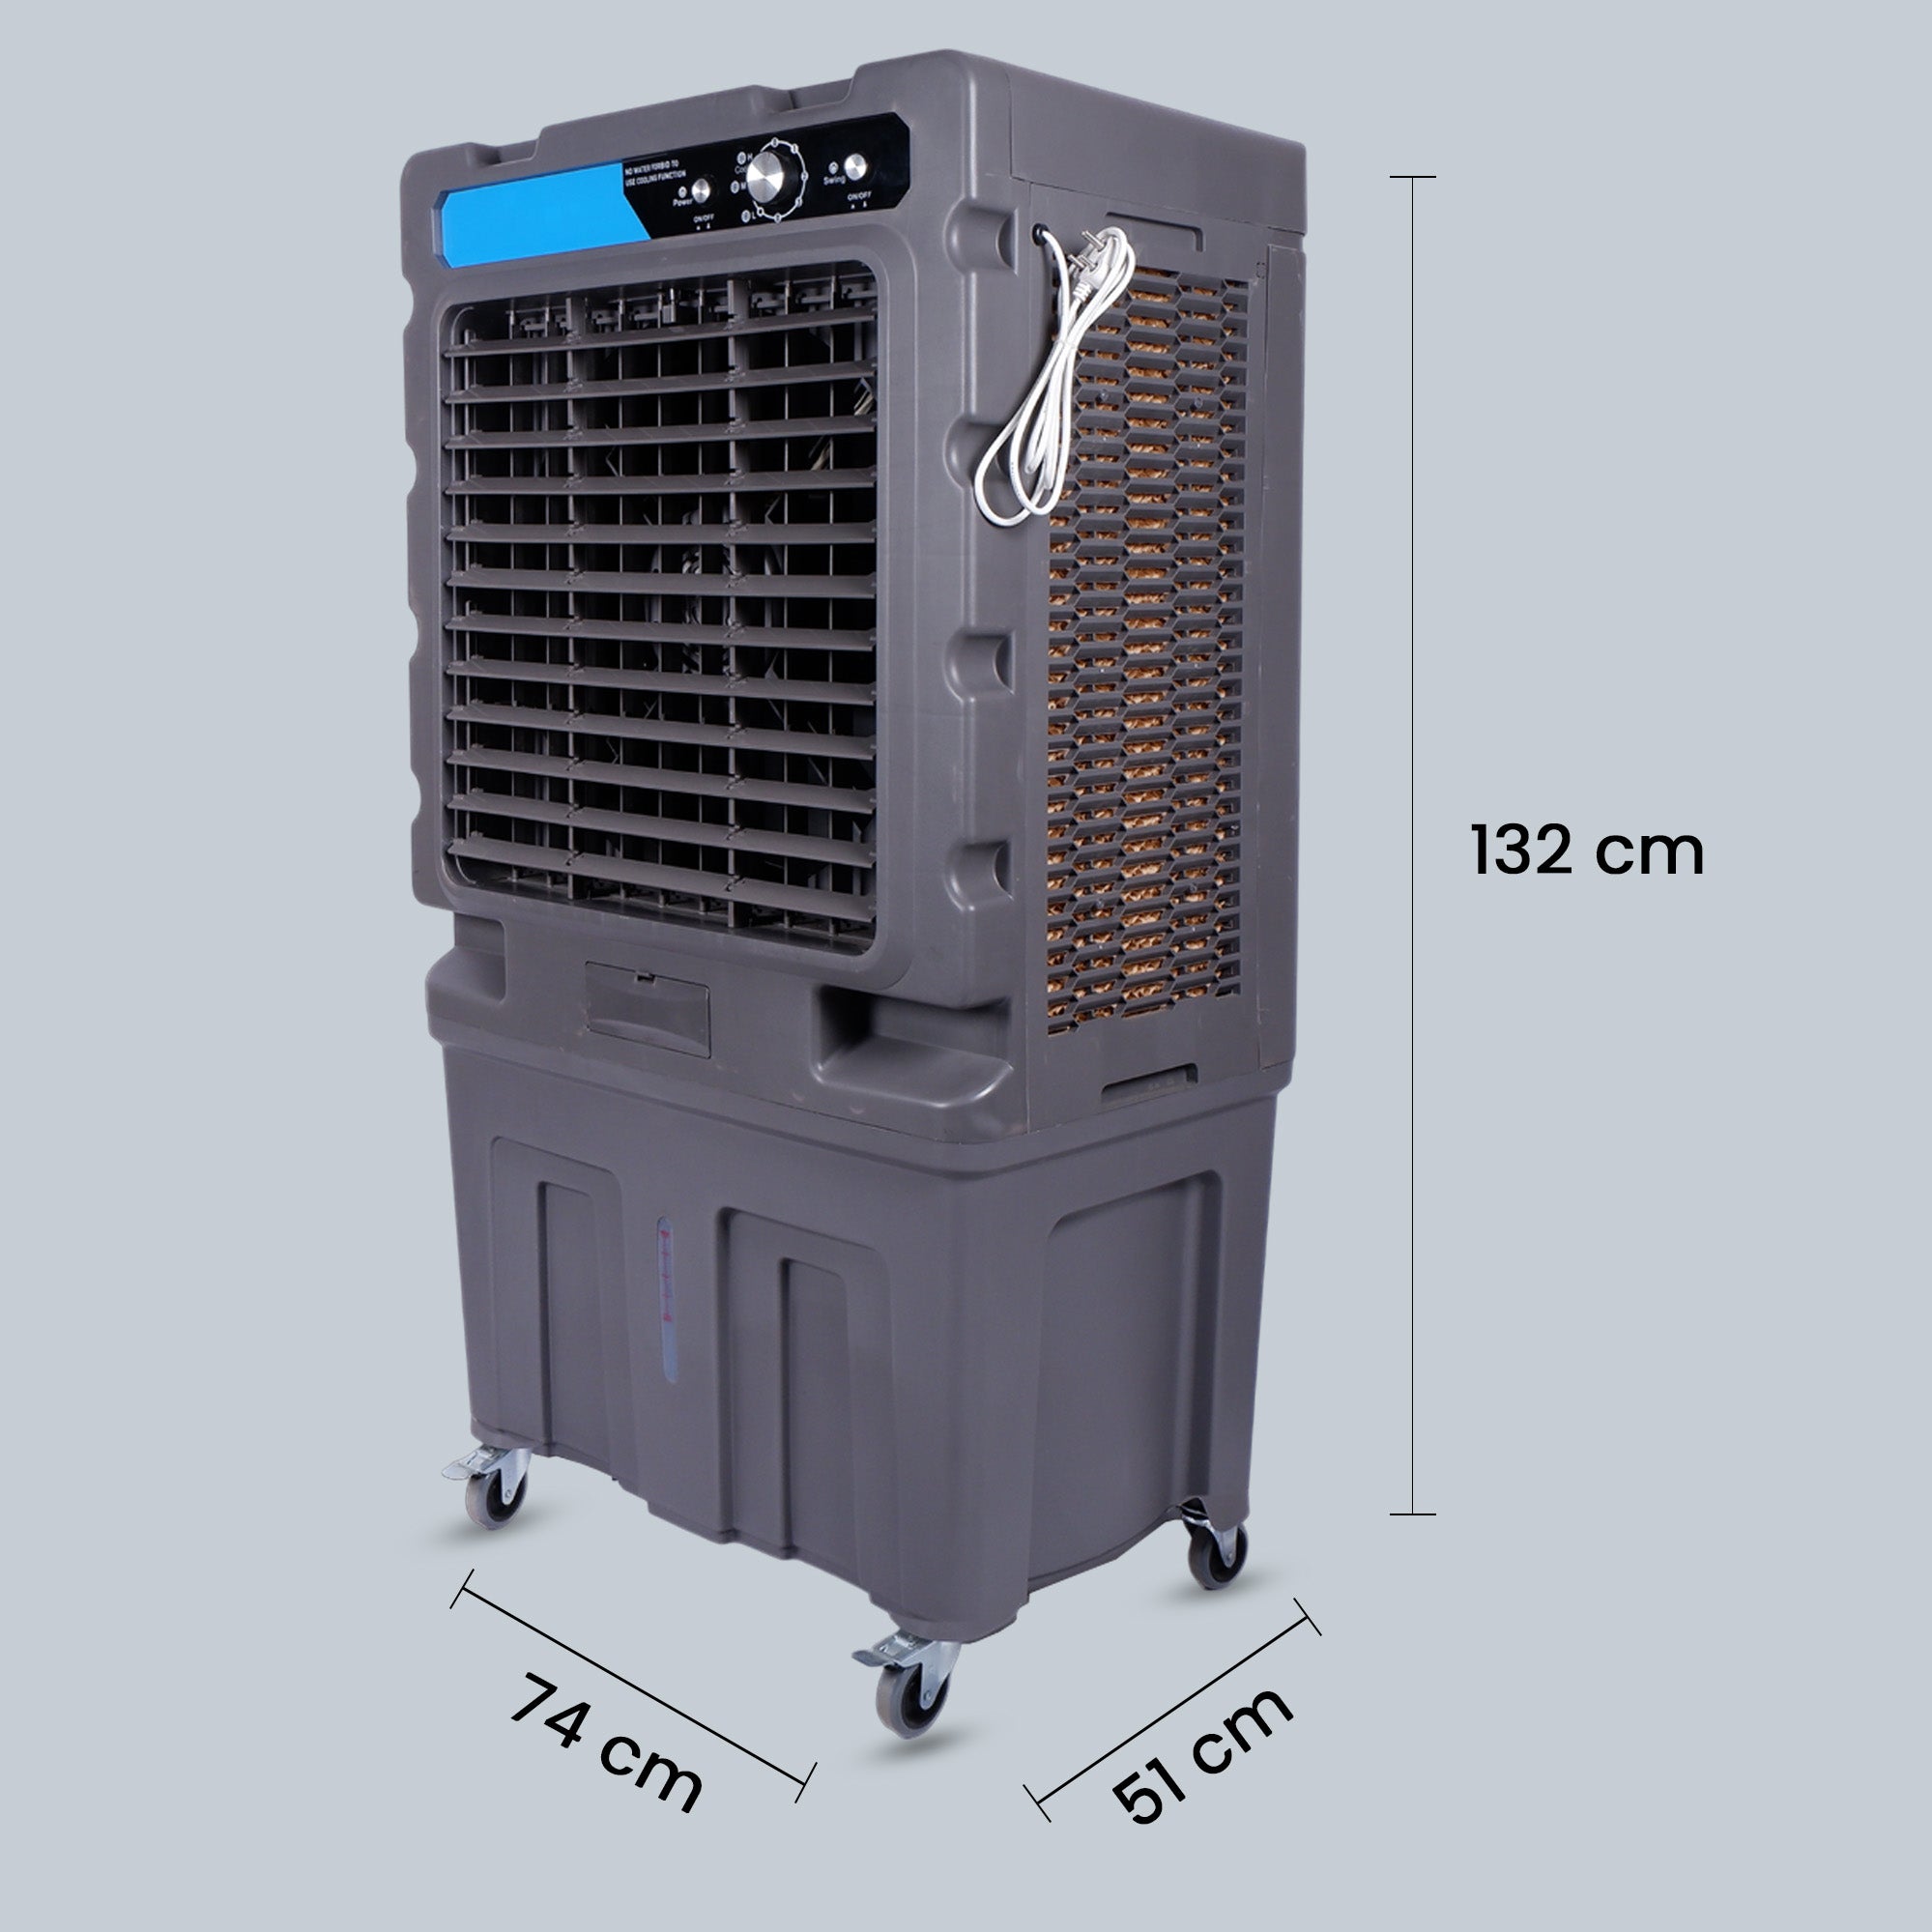 Cine Gold Magic Cool 150 LTR Heavy Duty Desert Air Cooler For Home/Office With Honeycomb Cooling & Auto Swing Technology, Powerful Air Throw & 3-Speed Control With Ice Chamber Dark Grey